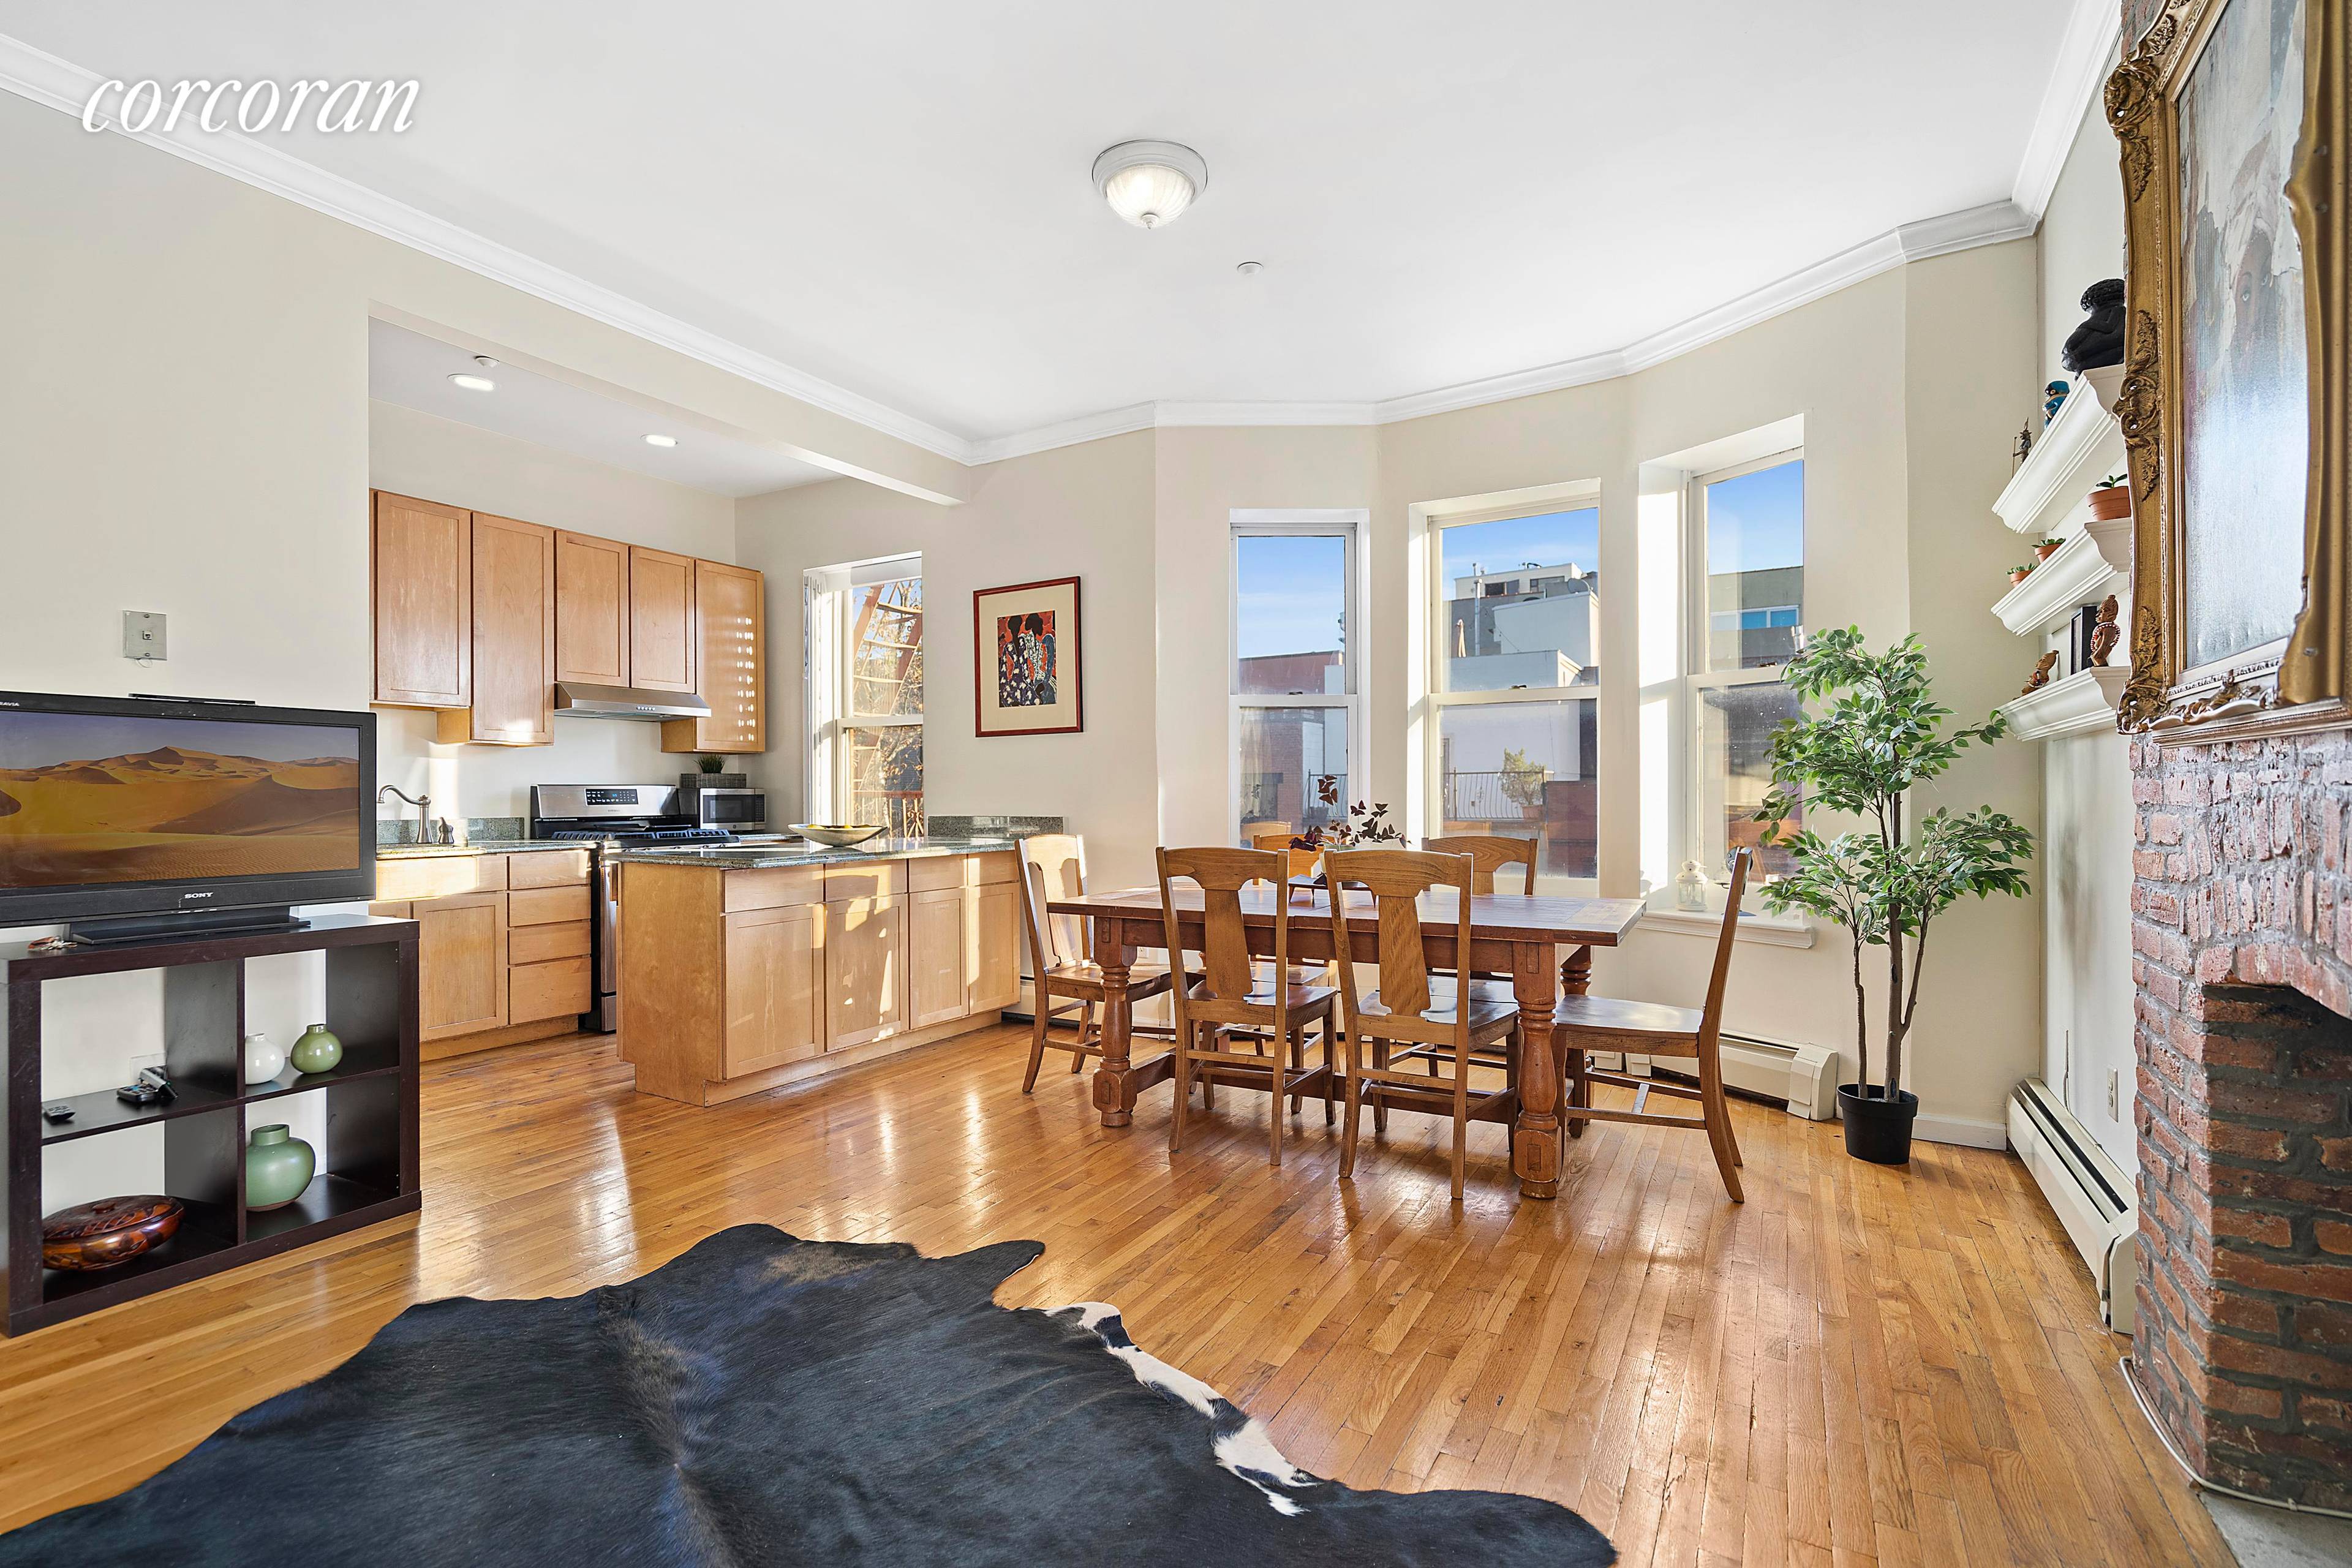 233 GREENE AVE, 3A CLINTON HILL, BROOKLYN NY 2BR 1BA W D COMMON GARDEN CONTACT EXCLUSIVE LISTING BROKERS.